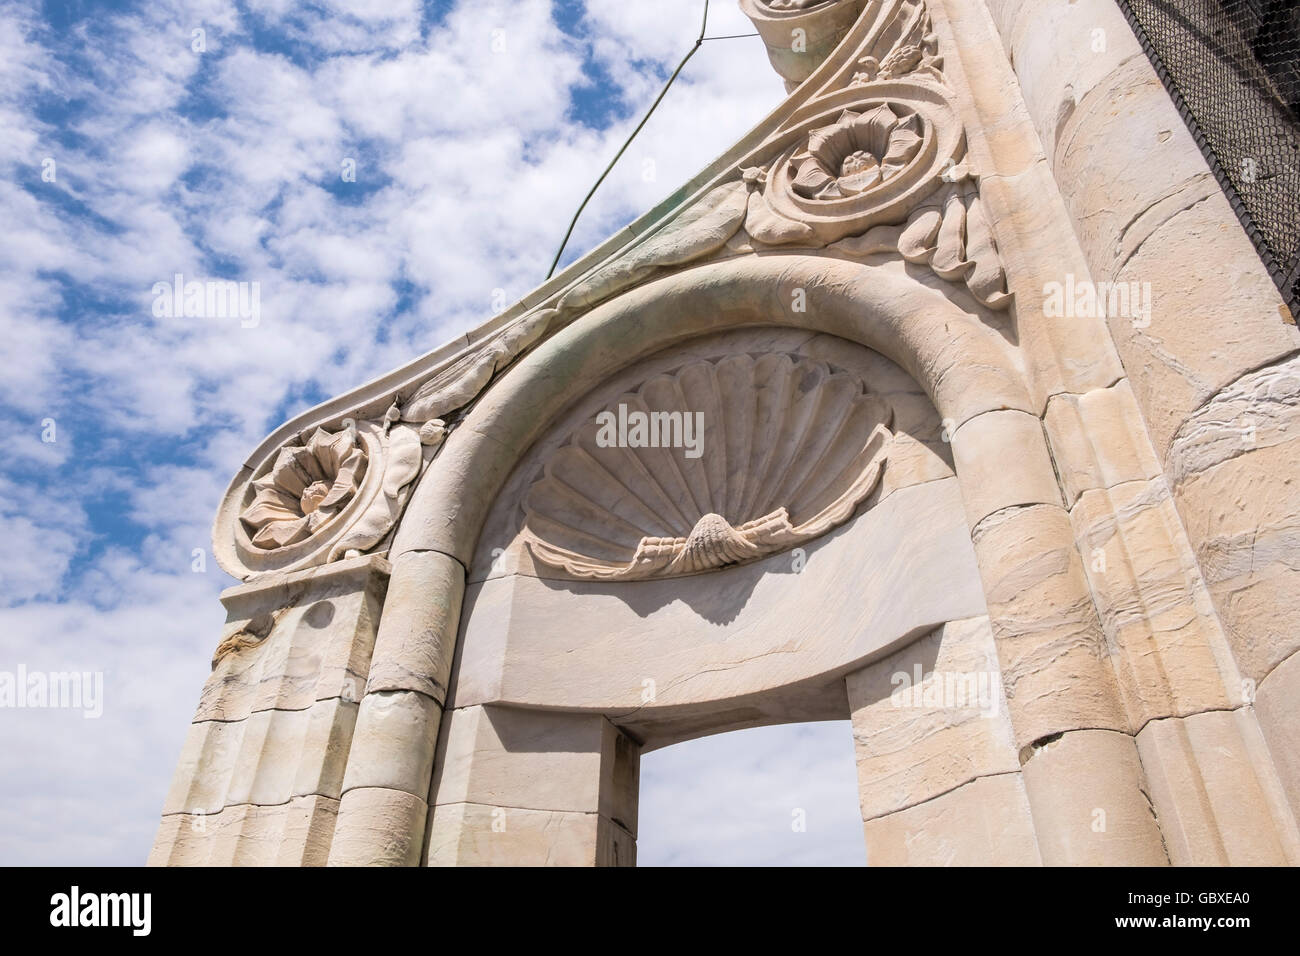 Giant stone carving of a scallop shell in an archway at the viewpoint on top of the Duomo, dome, Cathedral Santa Maria del Fiore Stock Photo